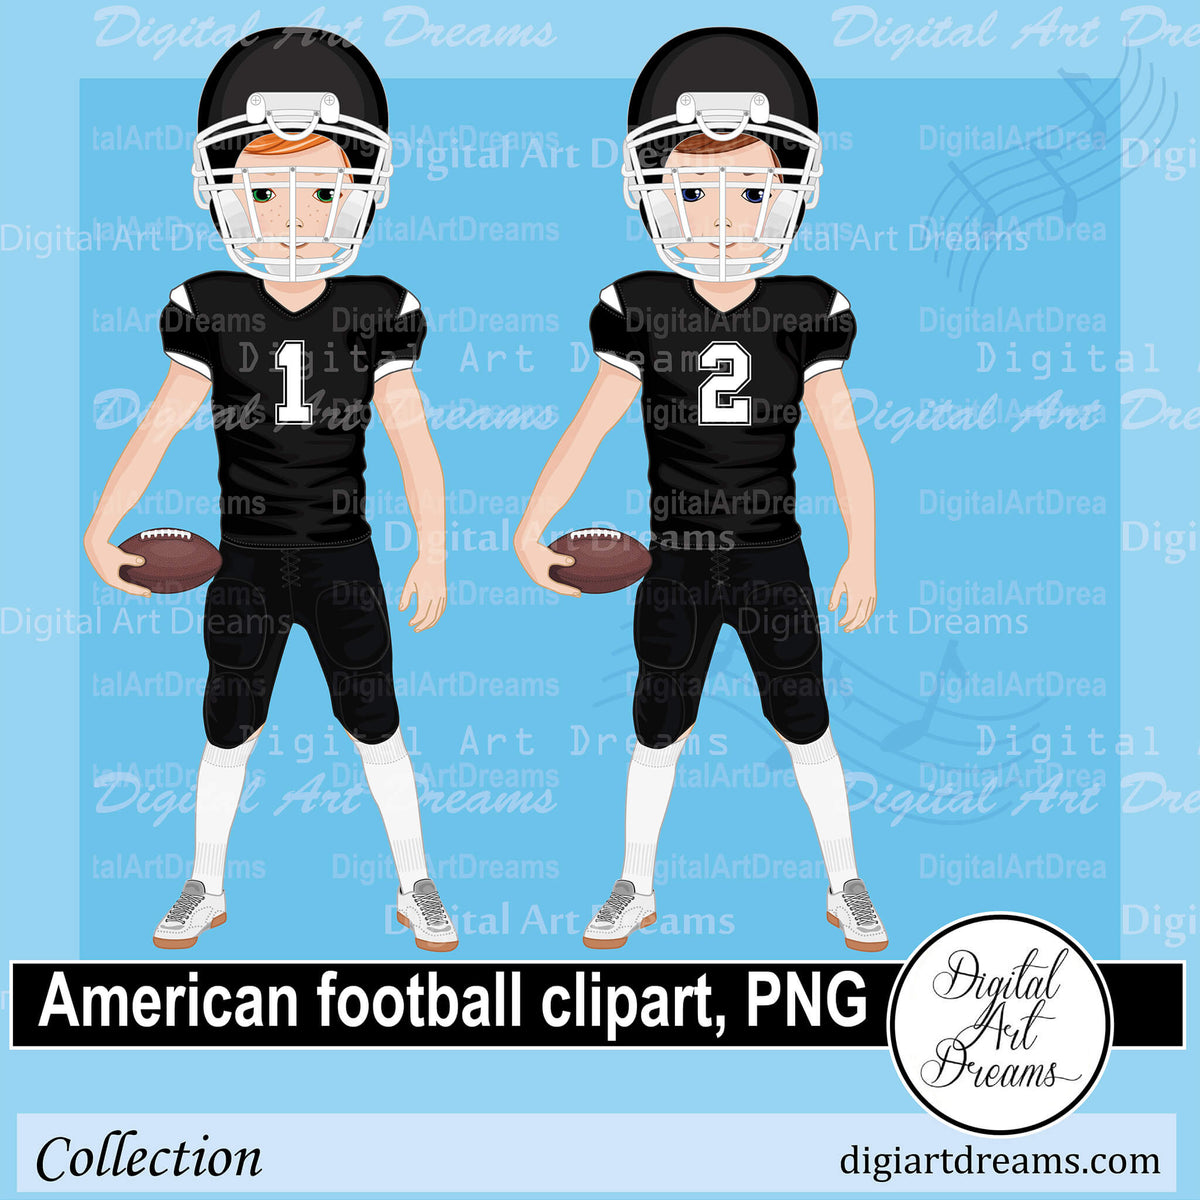 American Football Clipart, Black Team Images